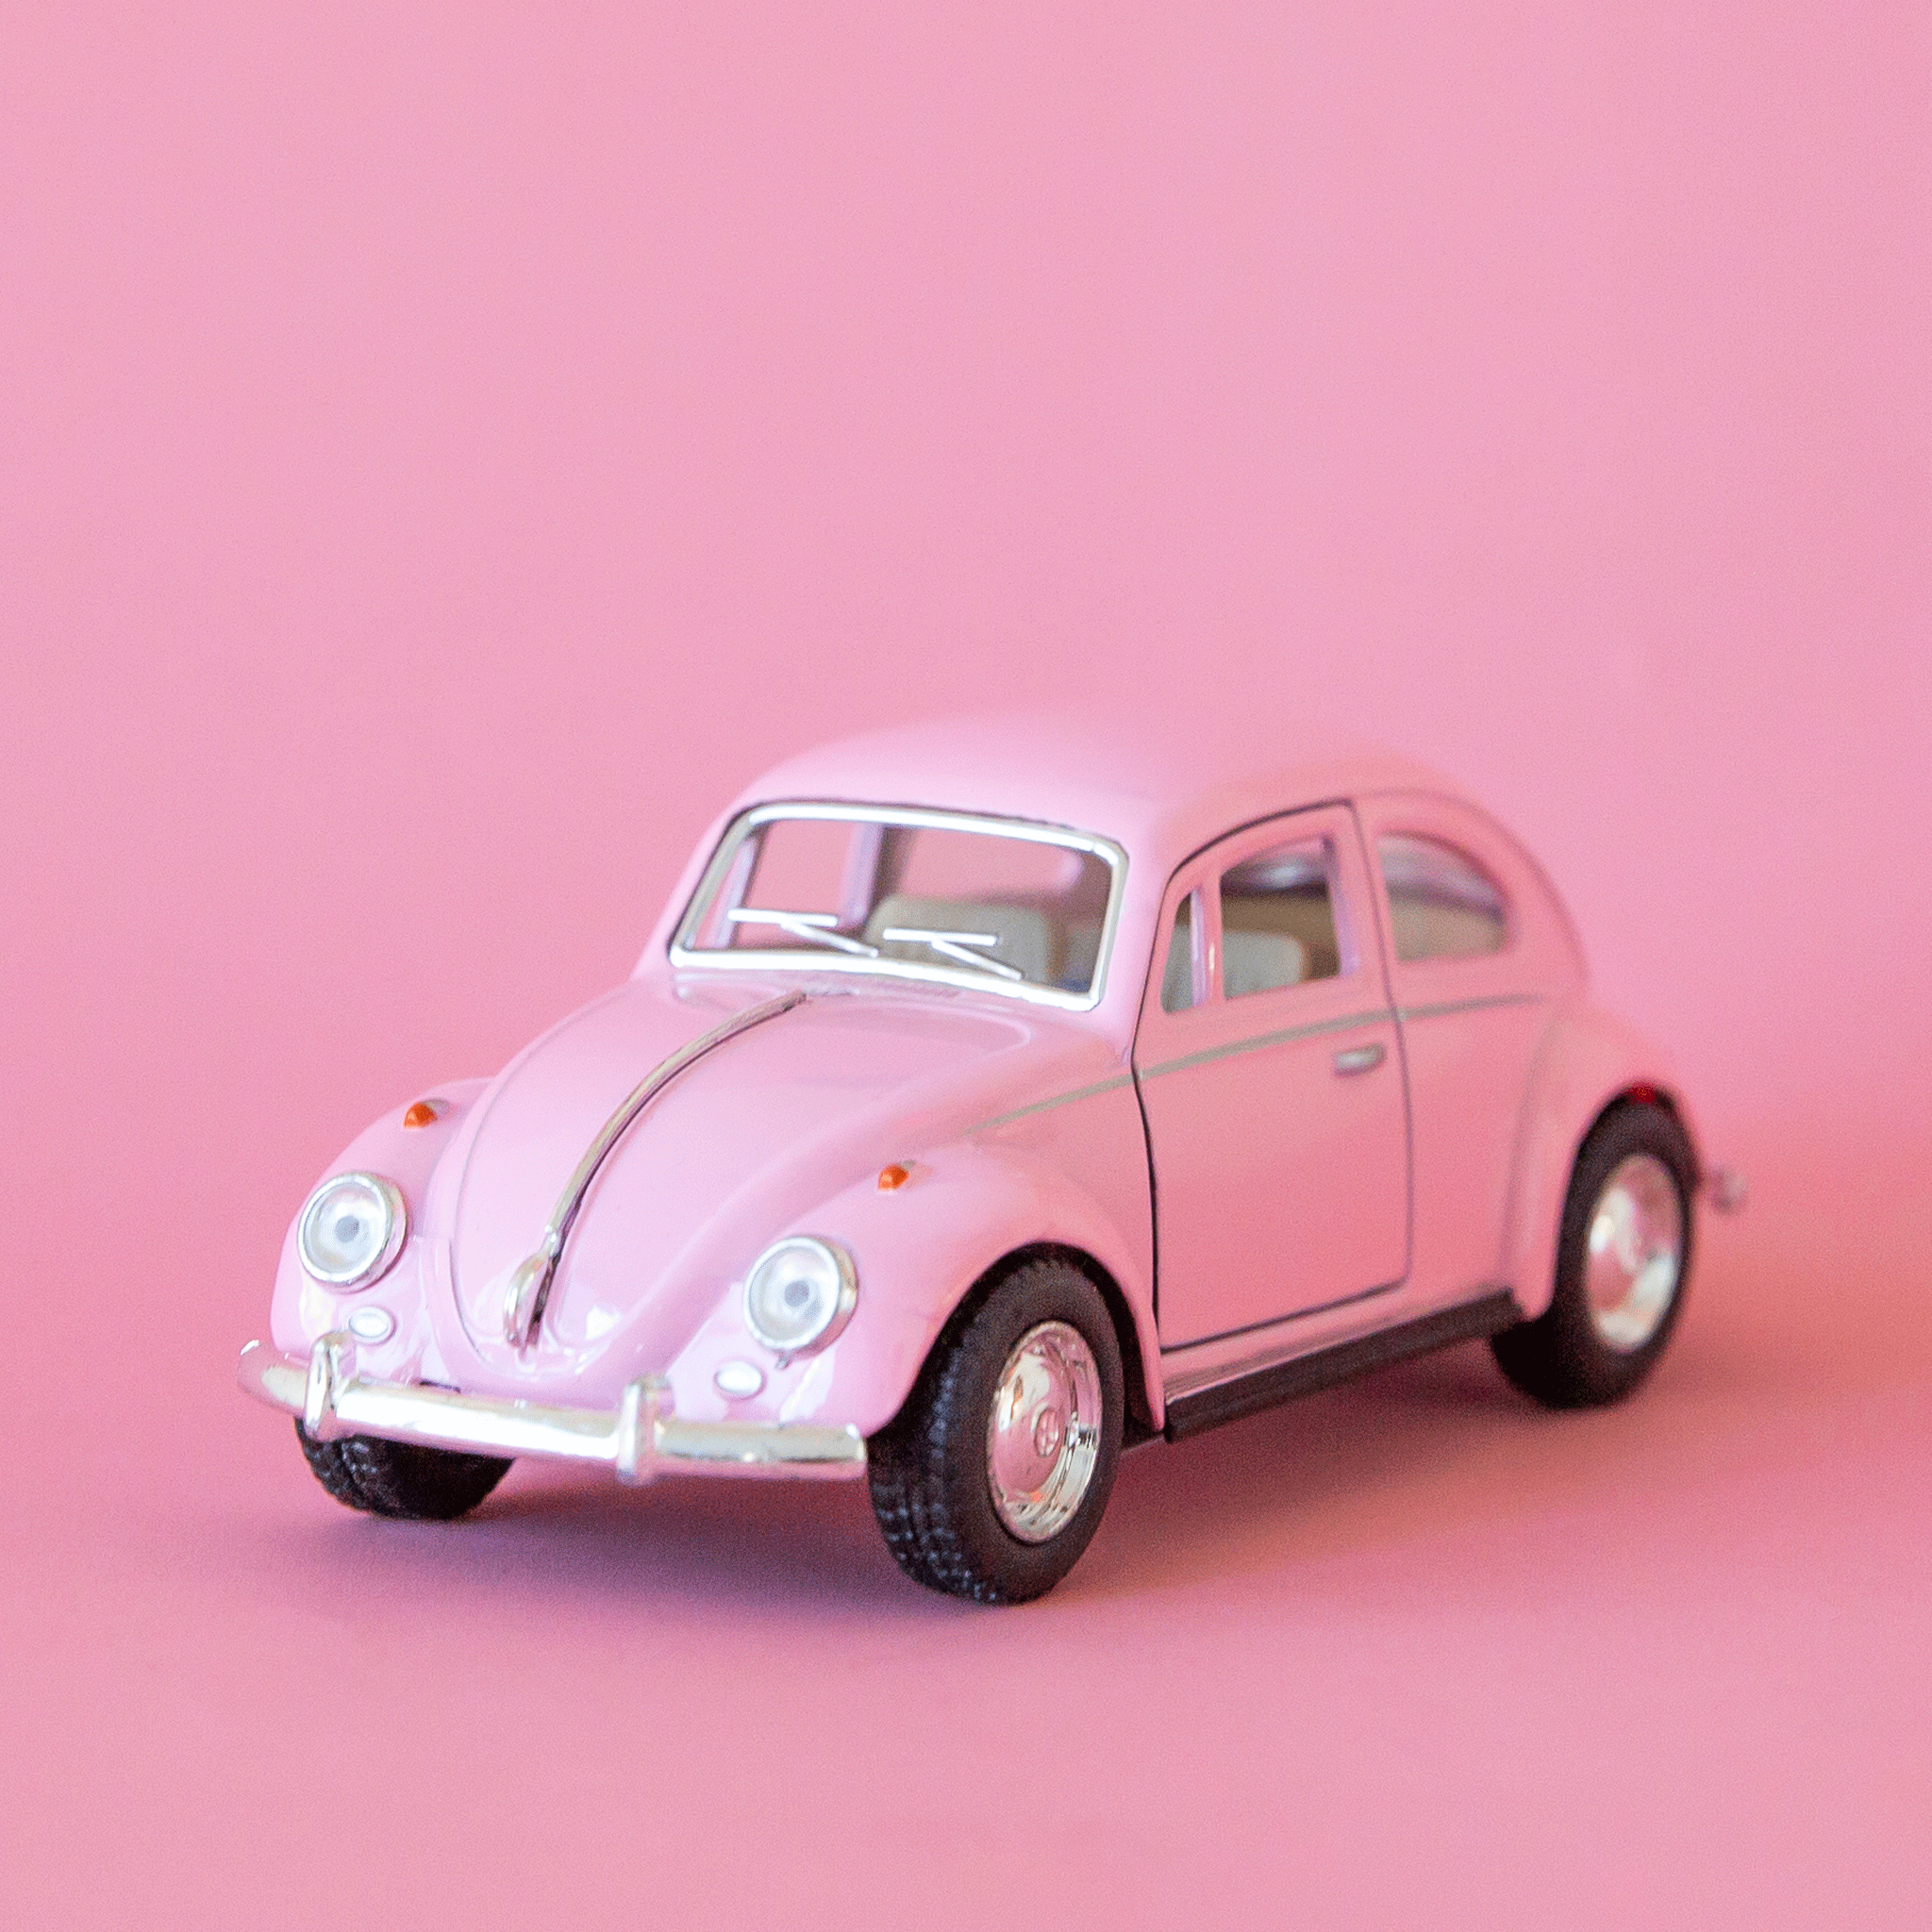 On a pink background is a pink VW bug toy. 